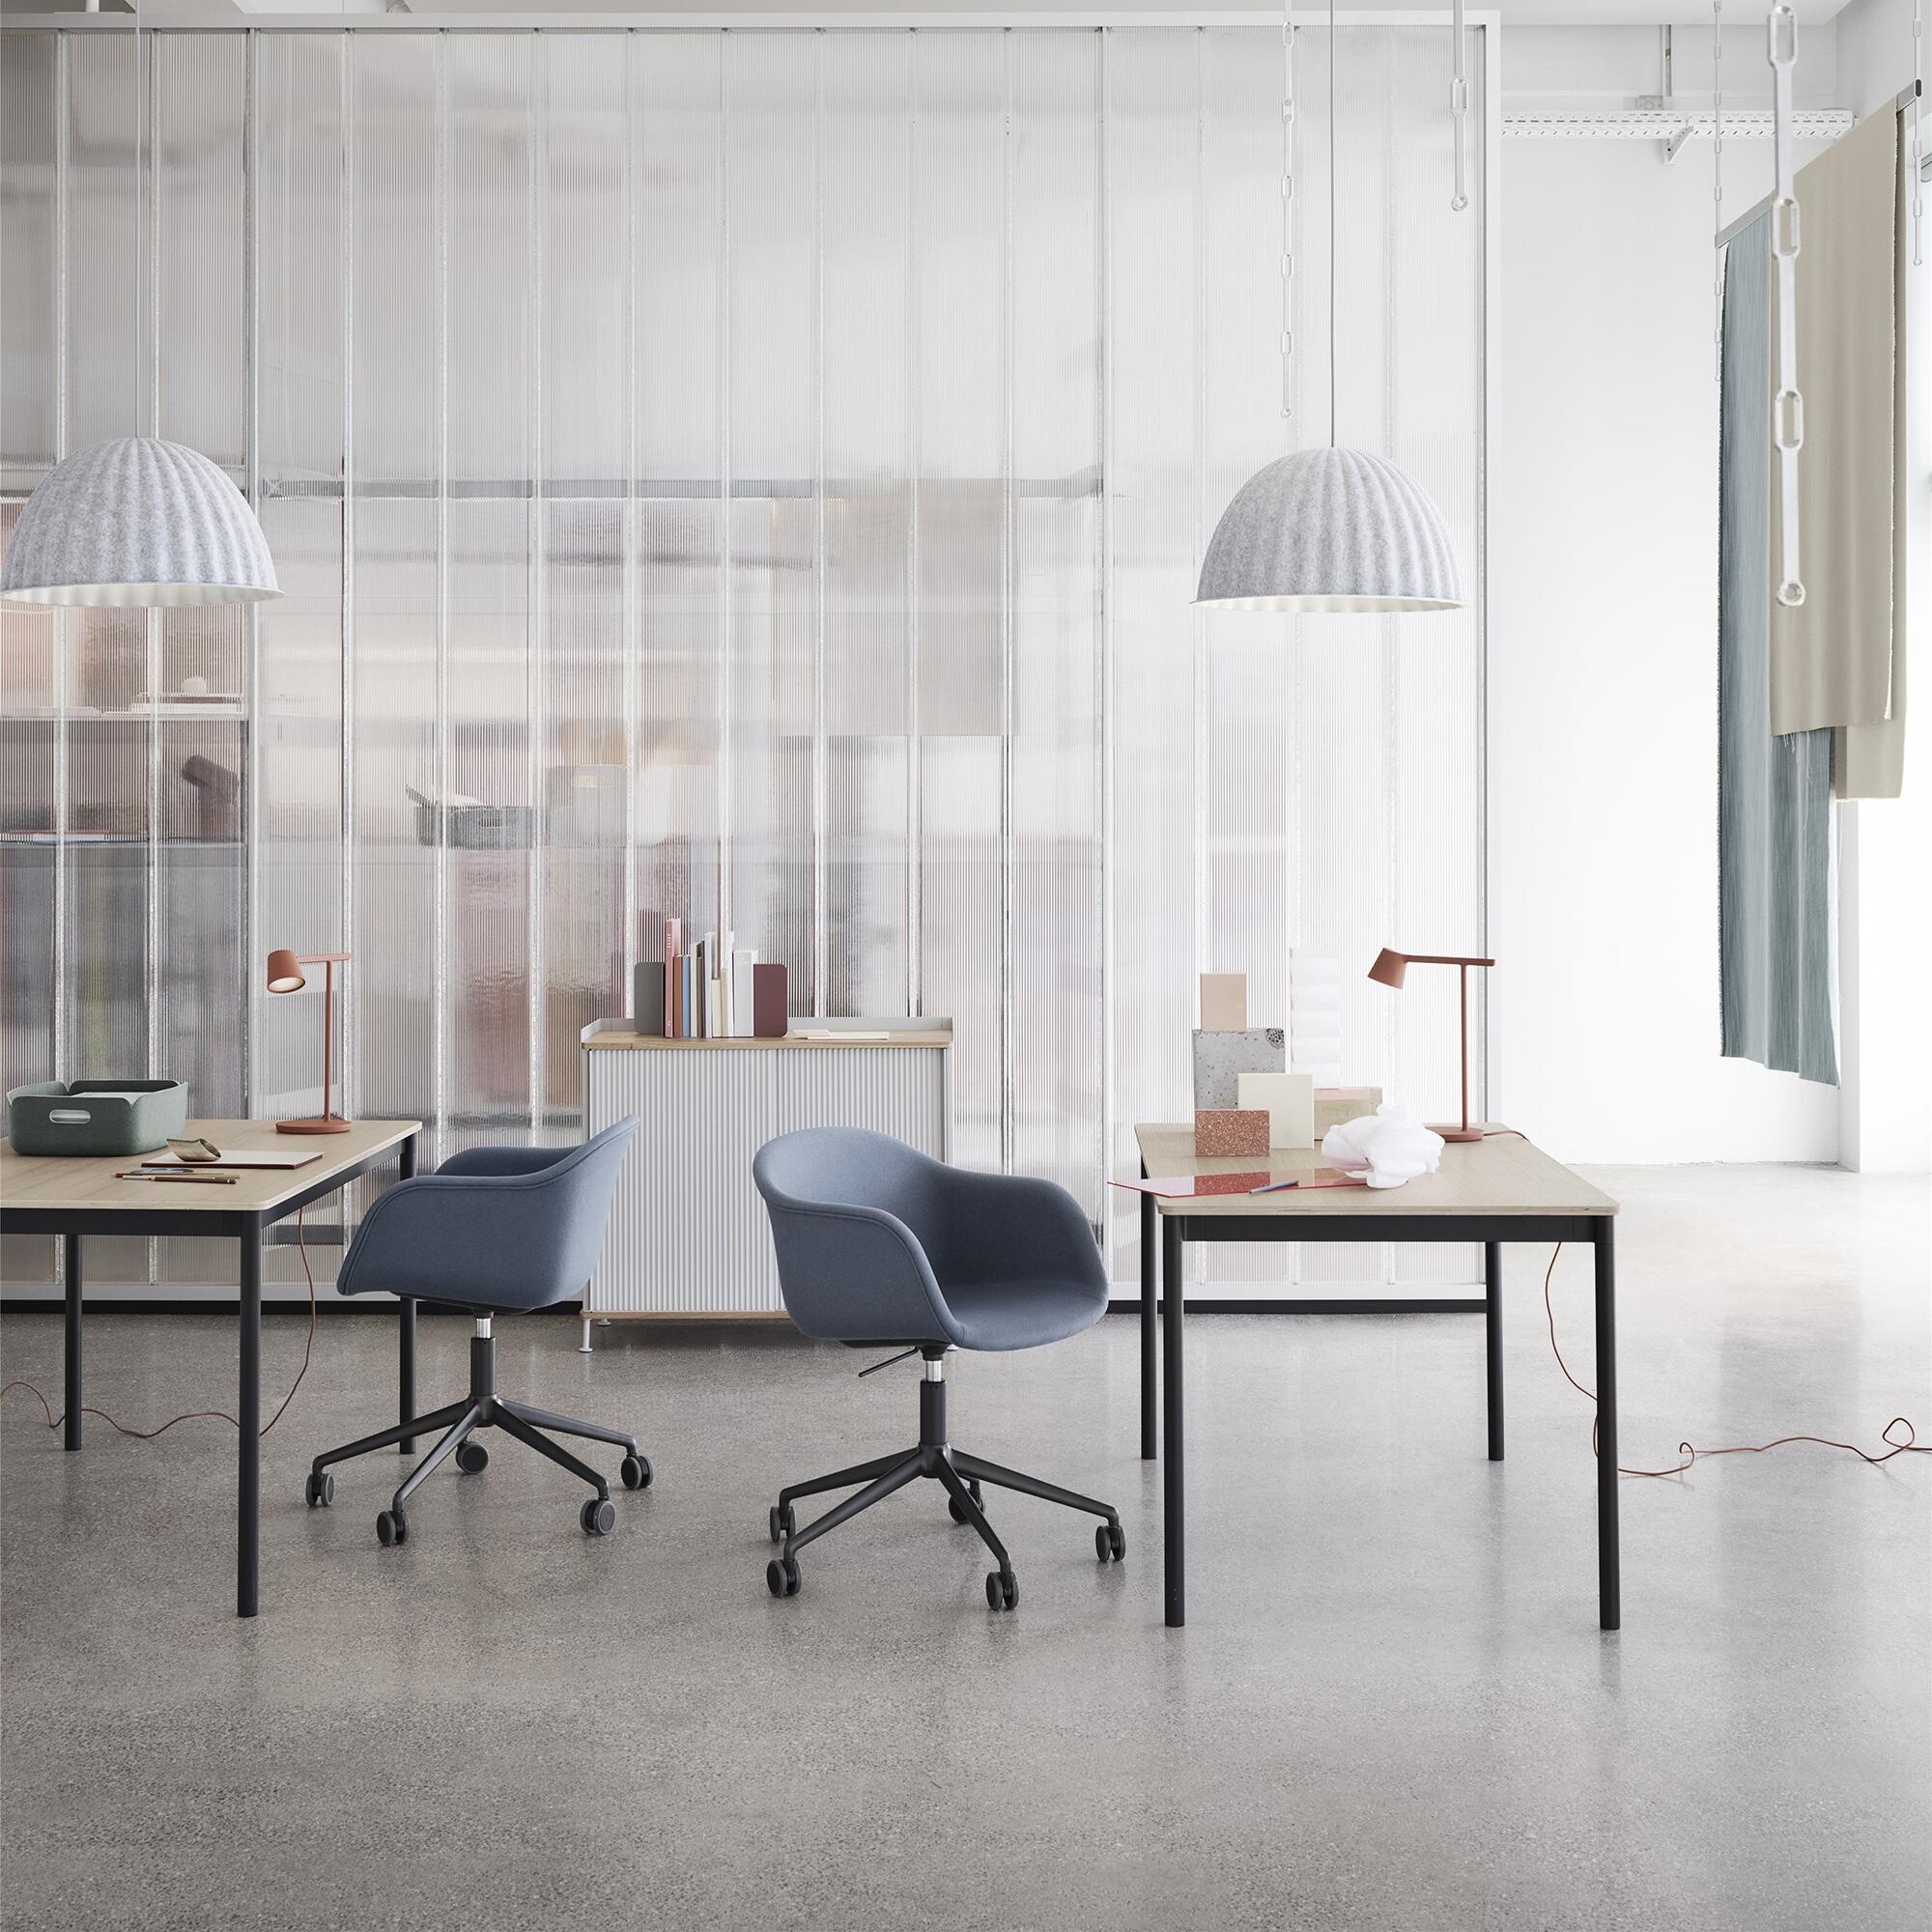 Muuto Fiber Chair With Castors And Gas Lift Ambientedirect